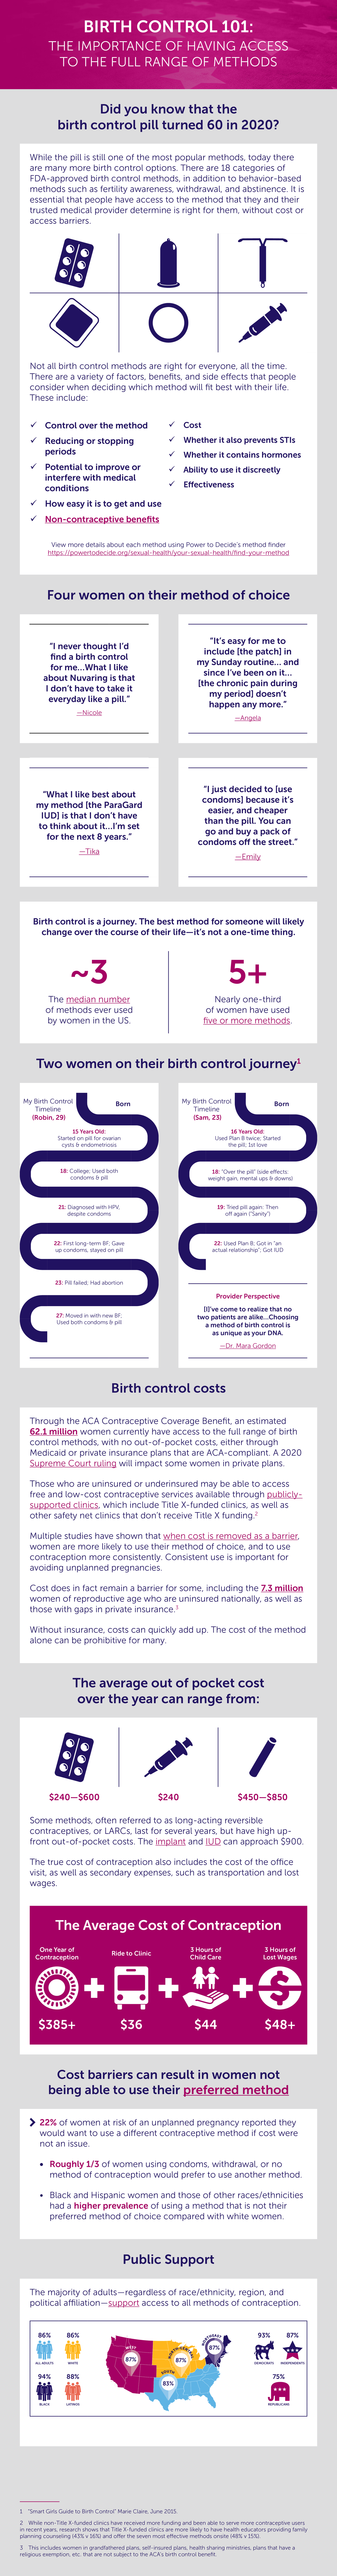 A long-form graphic outlining the basics of why access to the full range of birth control methods matters. 